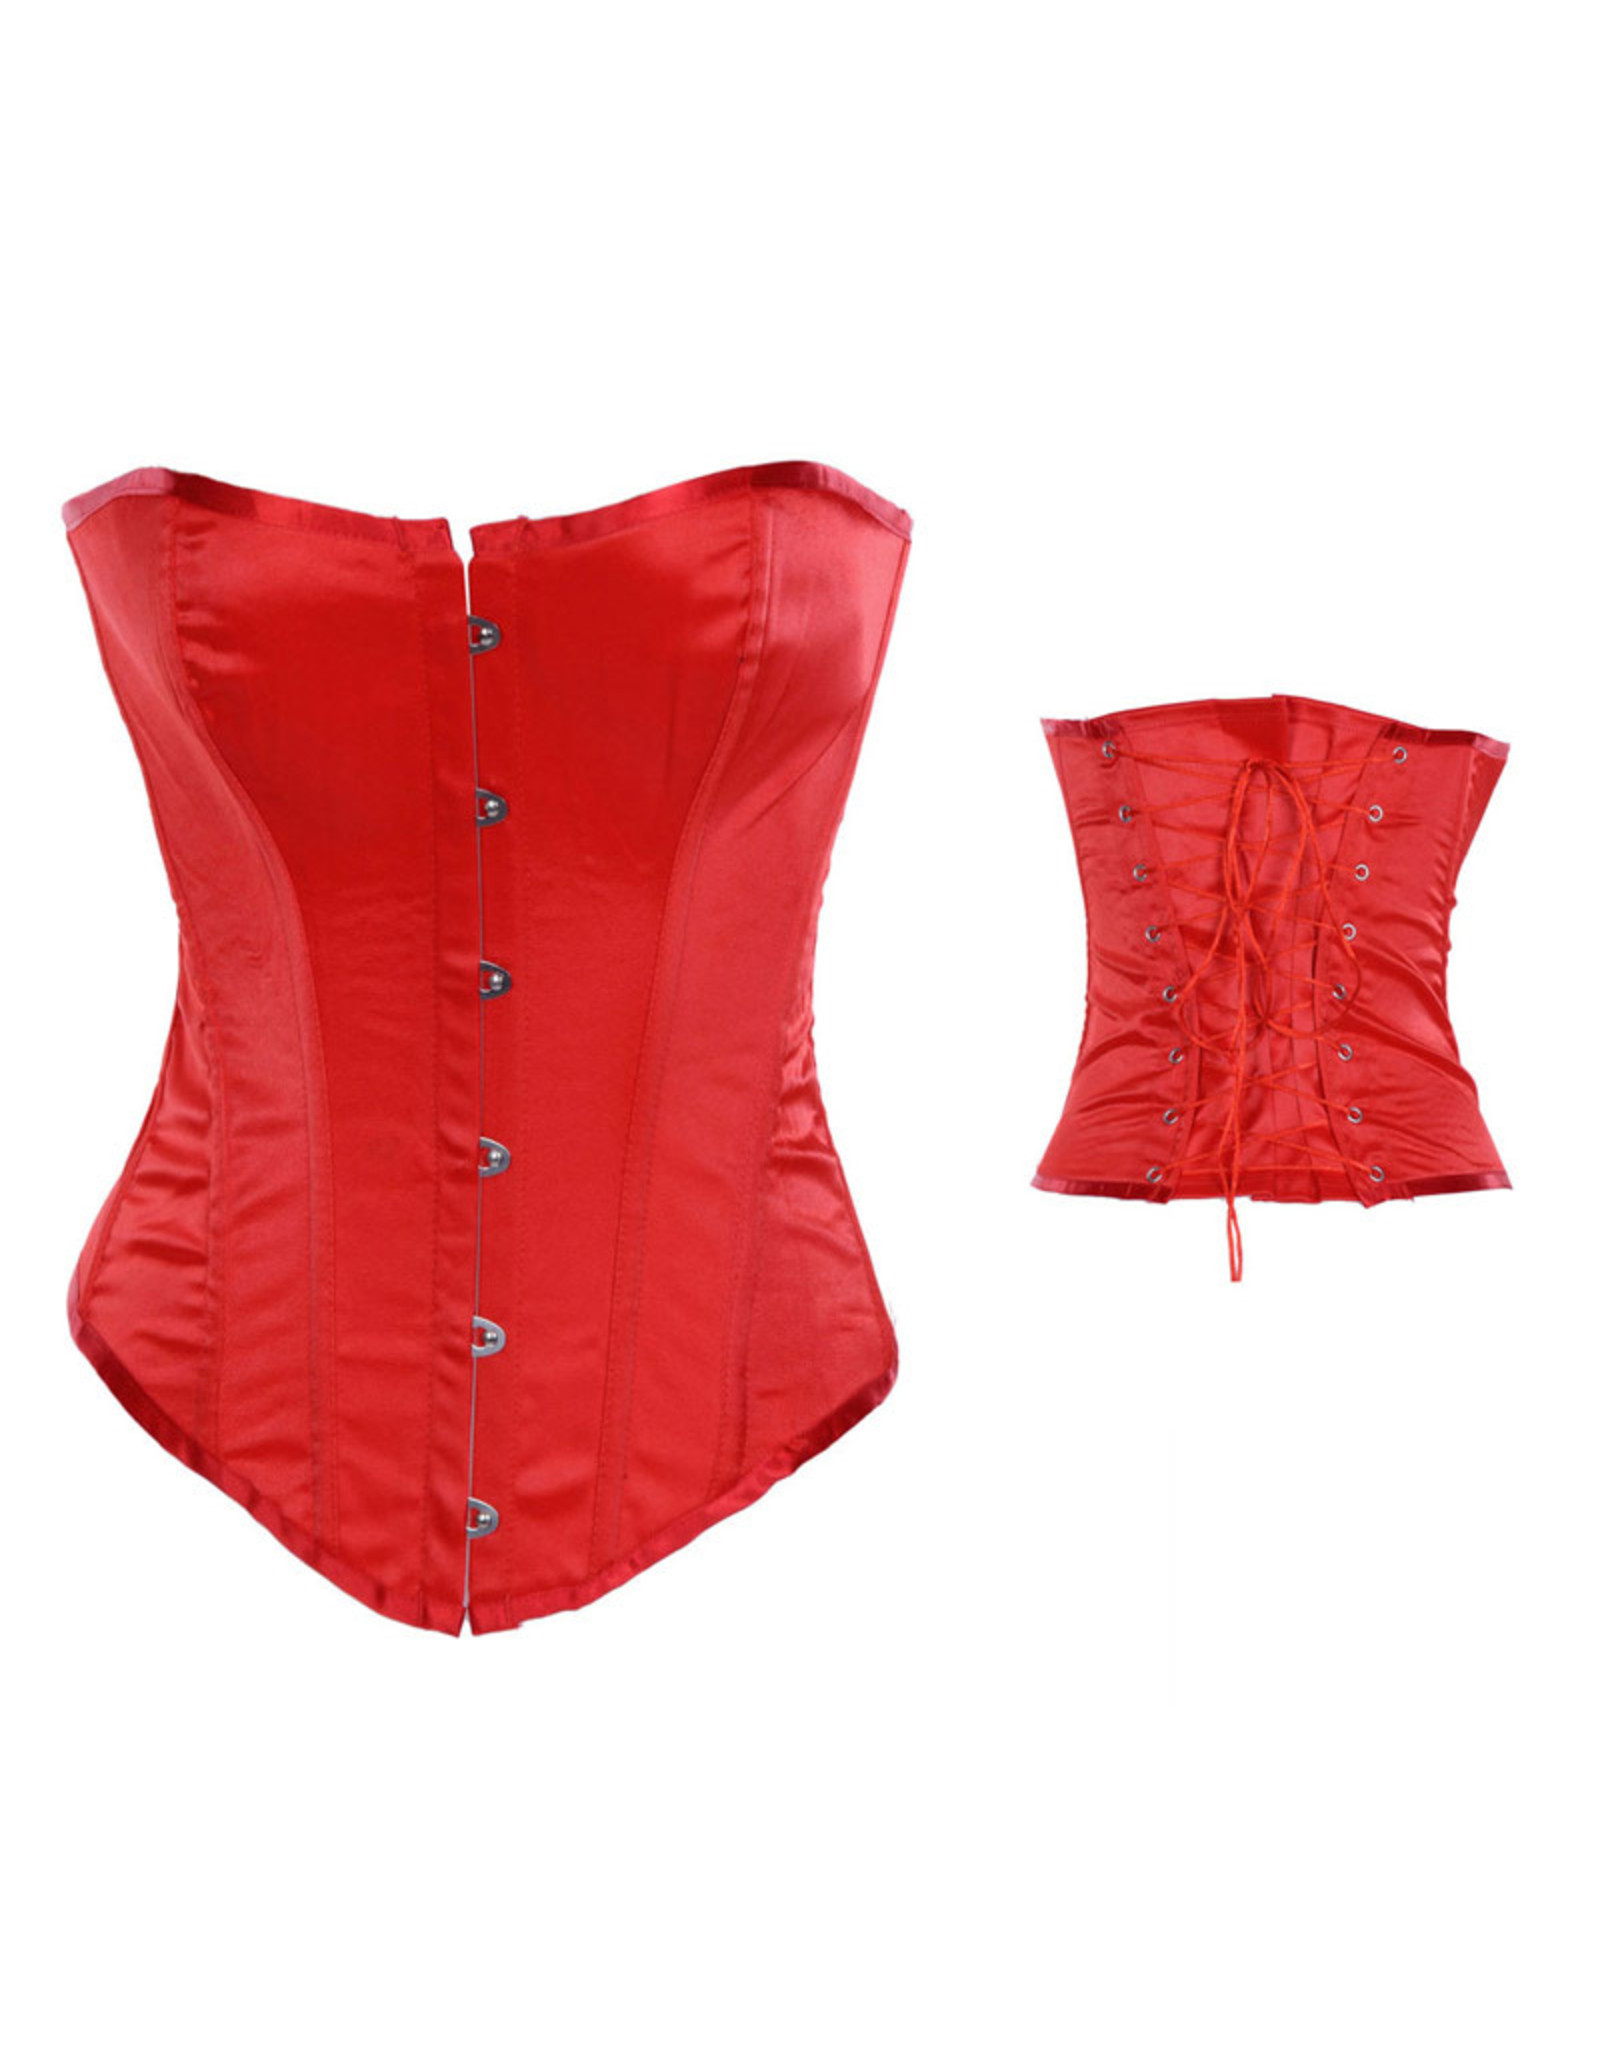 CLASSIC OVERBUST CORSET - RED - LARGE